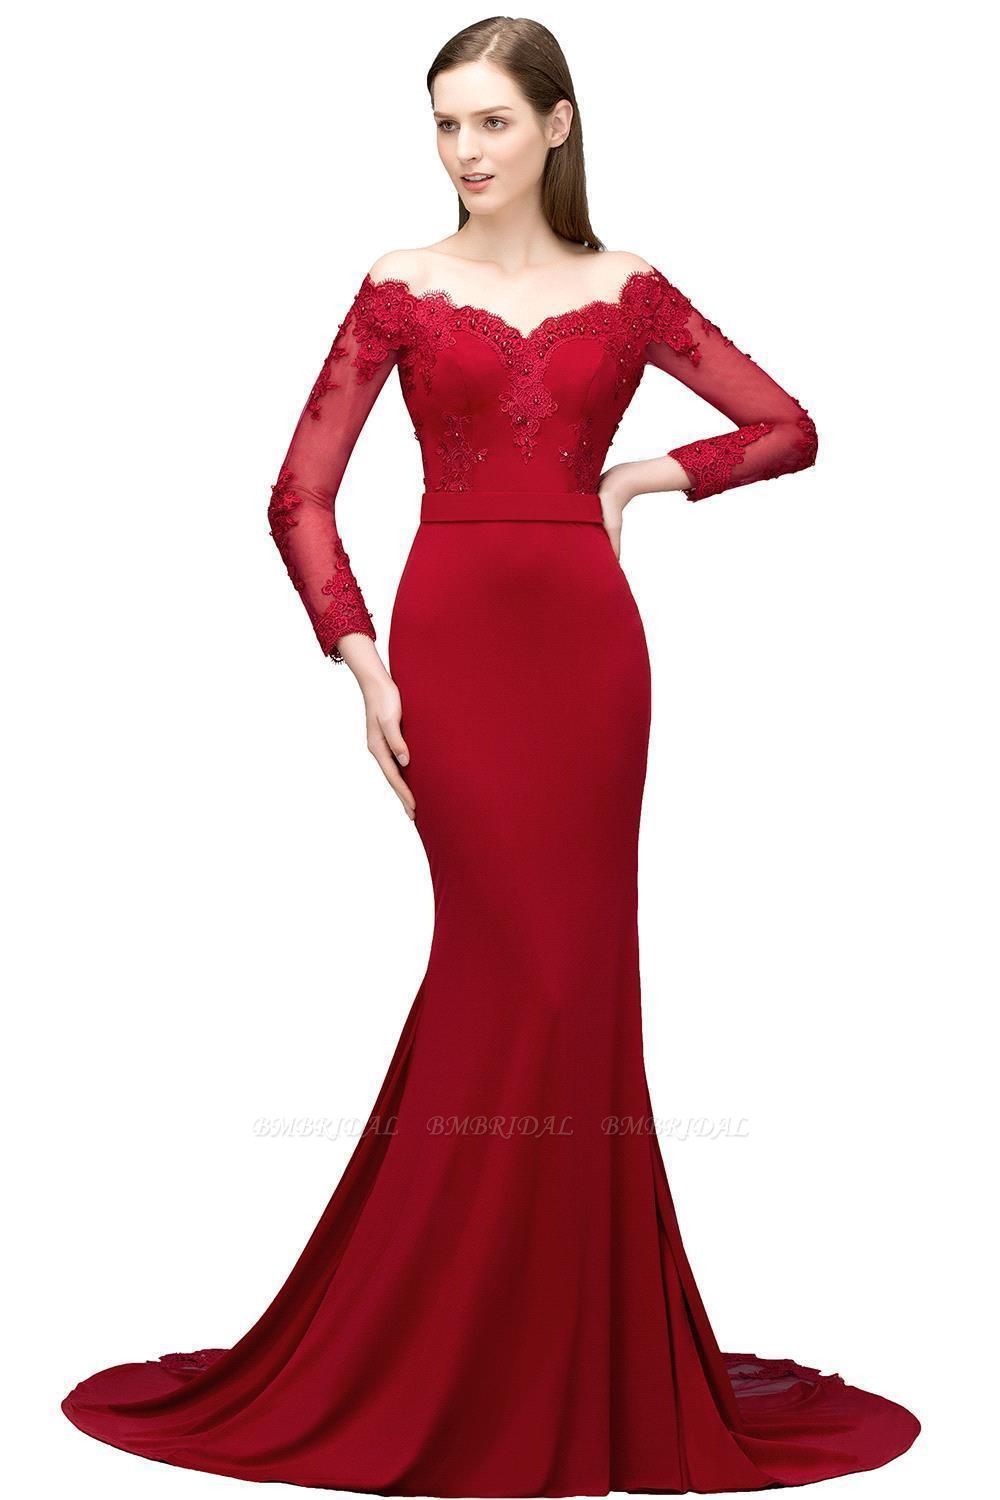 BMbridal Glamorous Long Sleeve Mermaid Evening Prom Dress With Lace Appliques Online